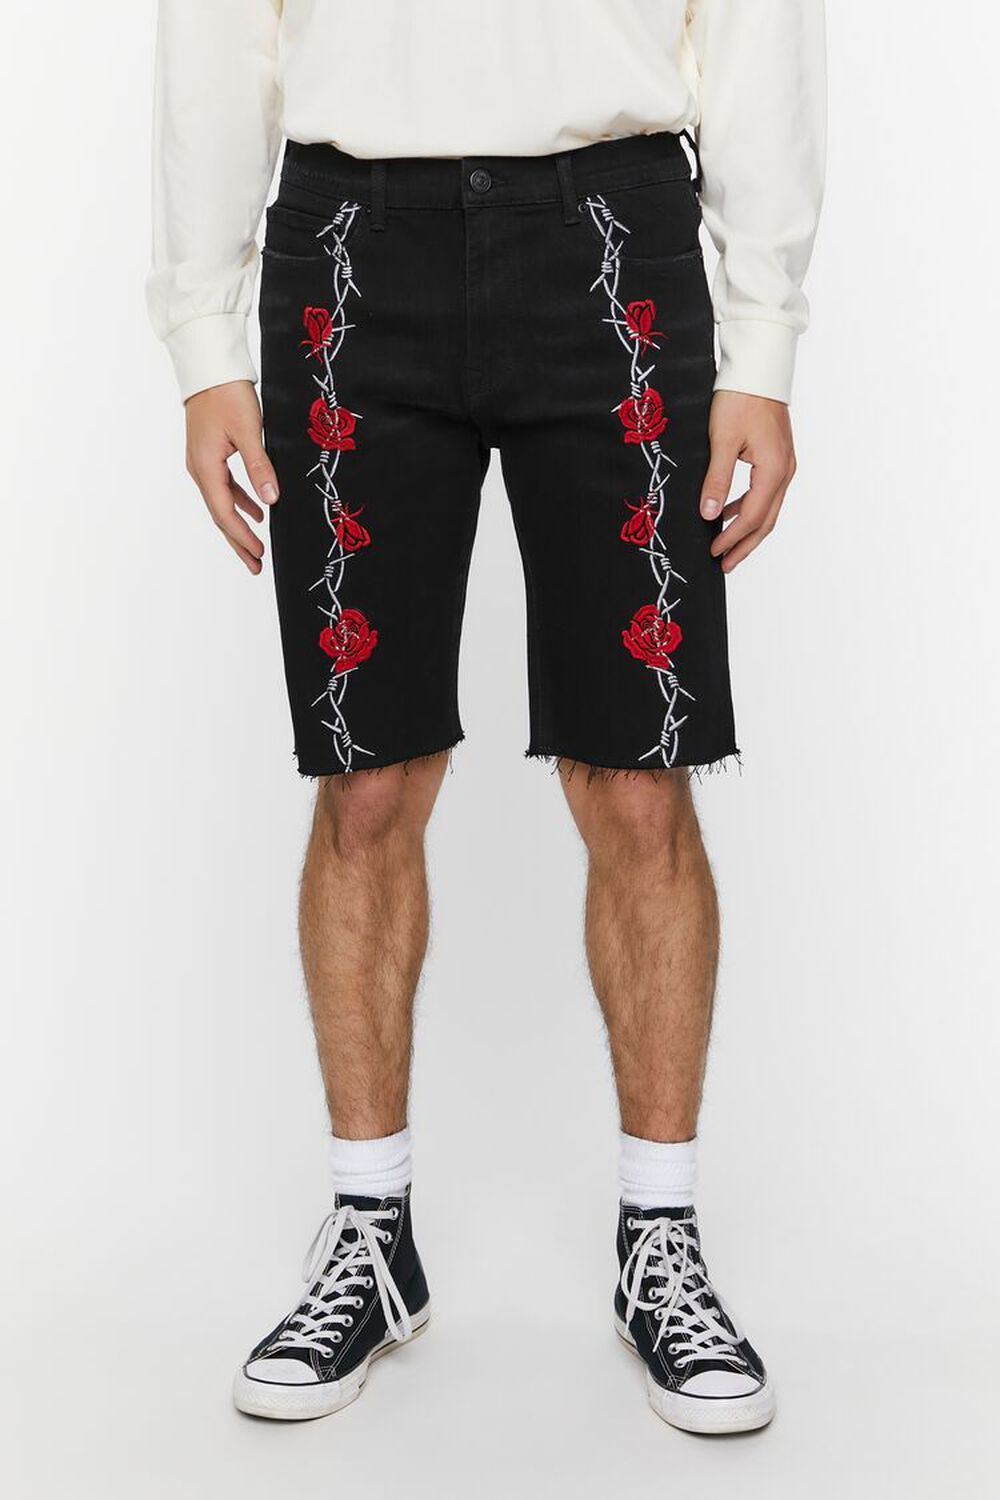 BLACK/MULTI Embroidered Wire & Roses Denim Shorts, image 2